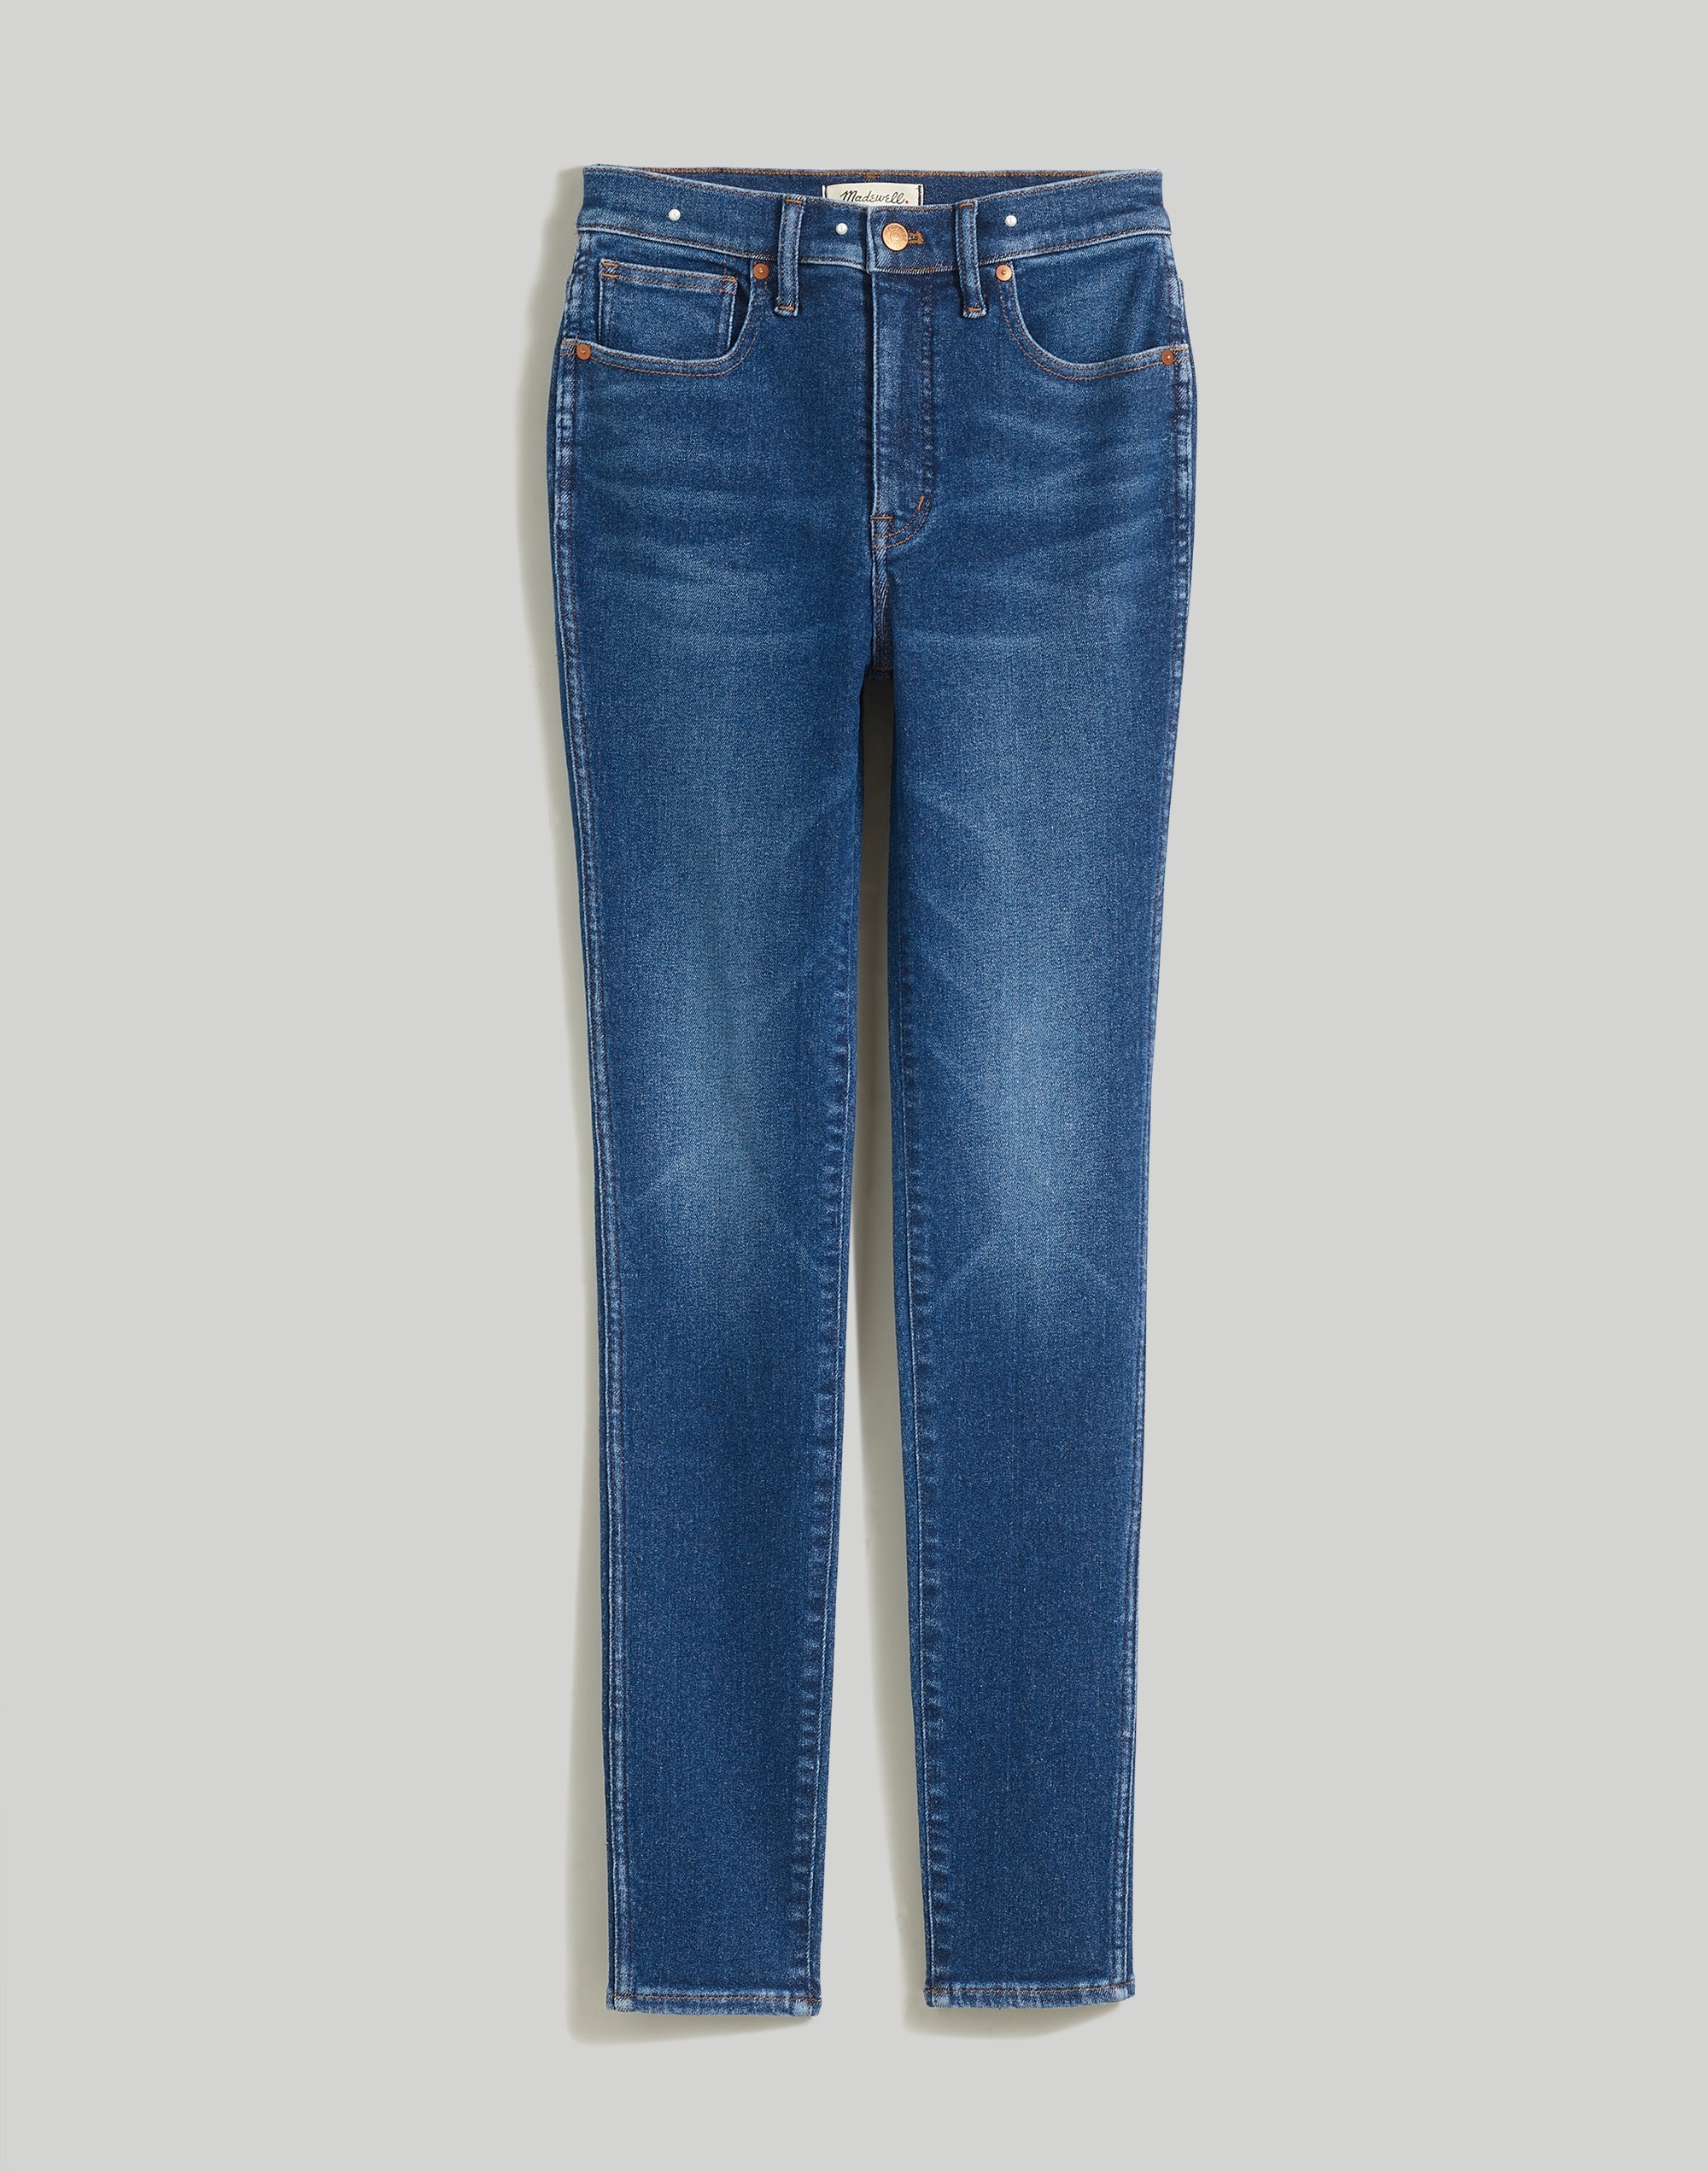 Tall 10 High-Rise Skinny Jeans in Smithley Wash